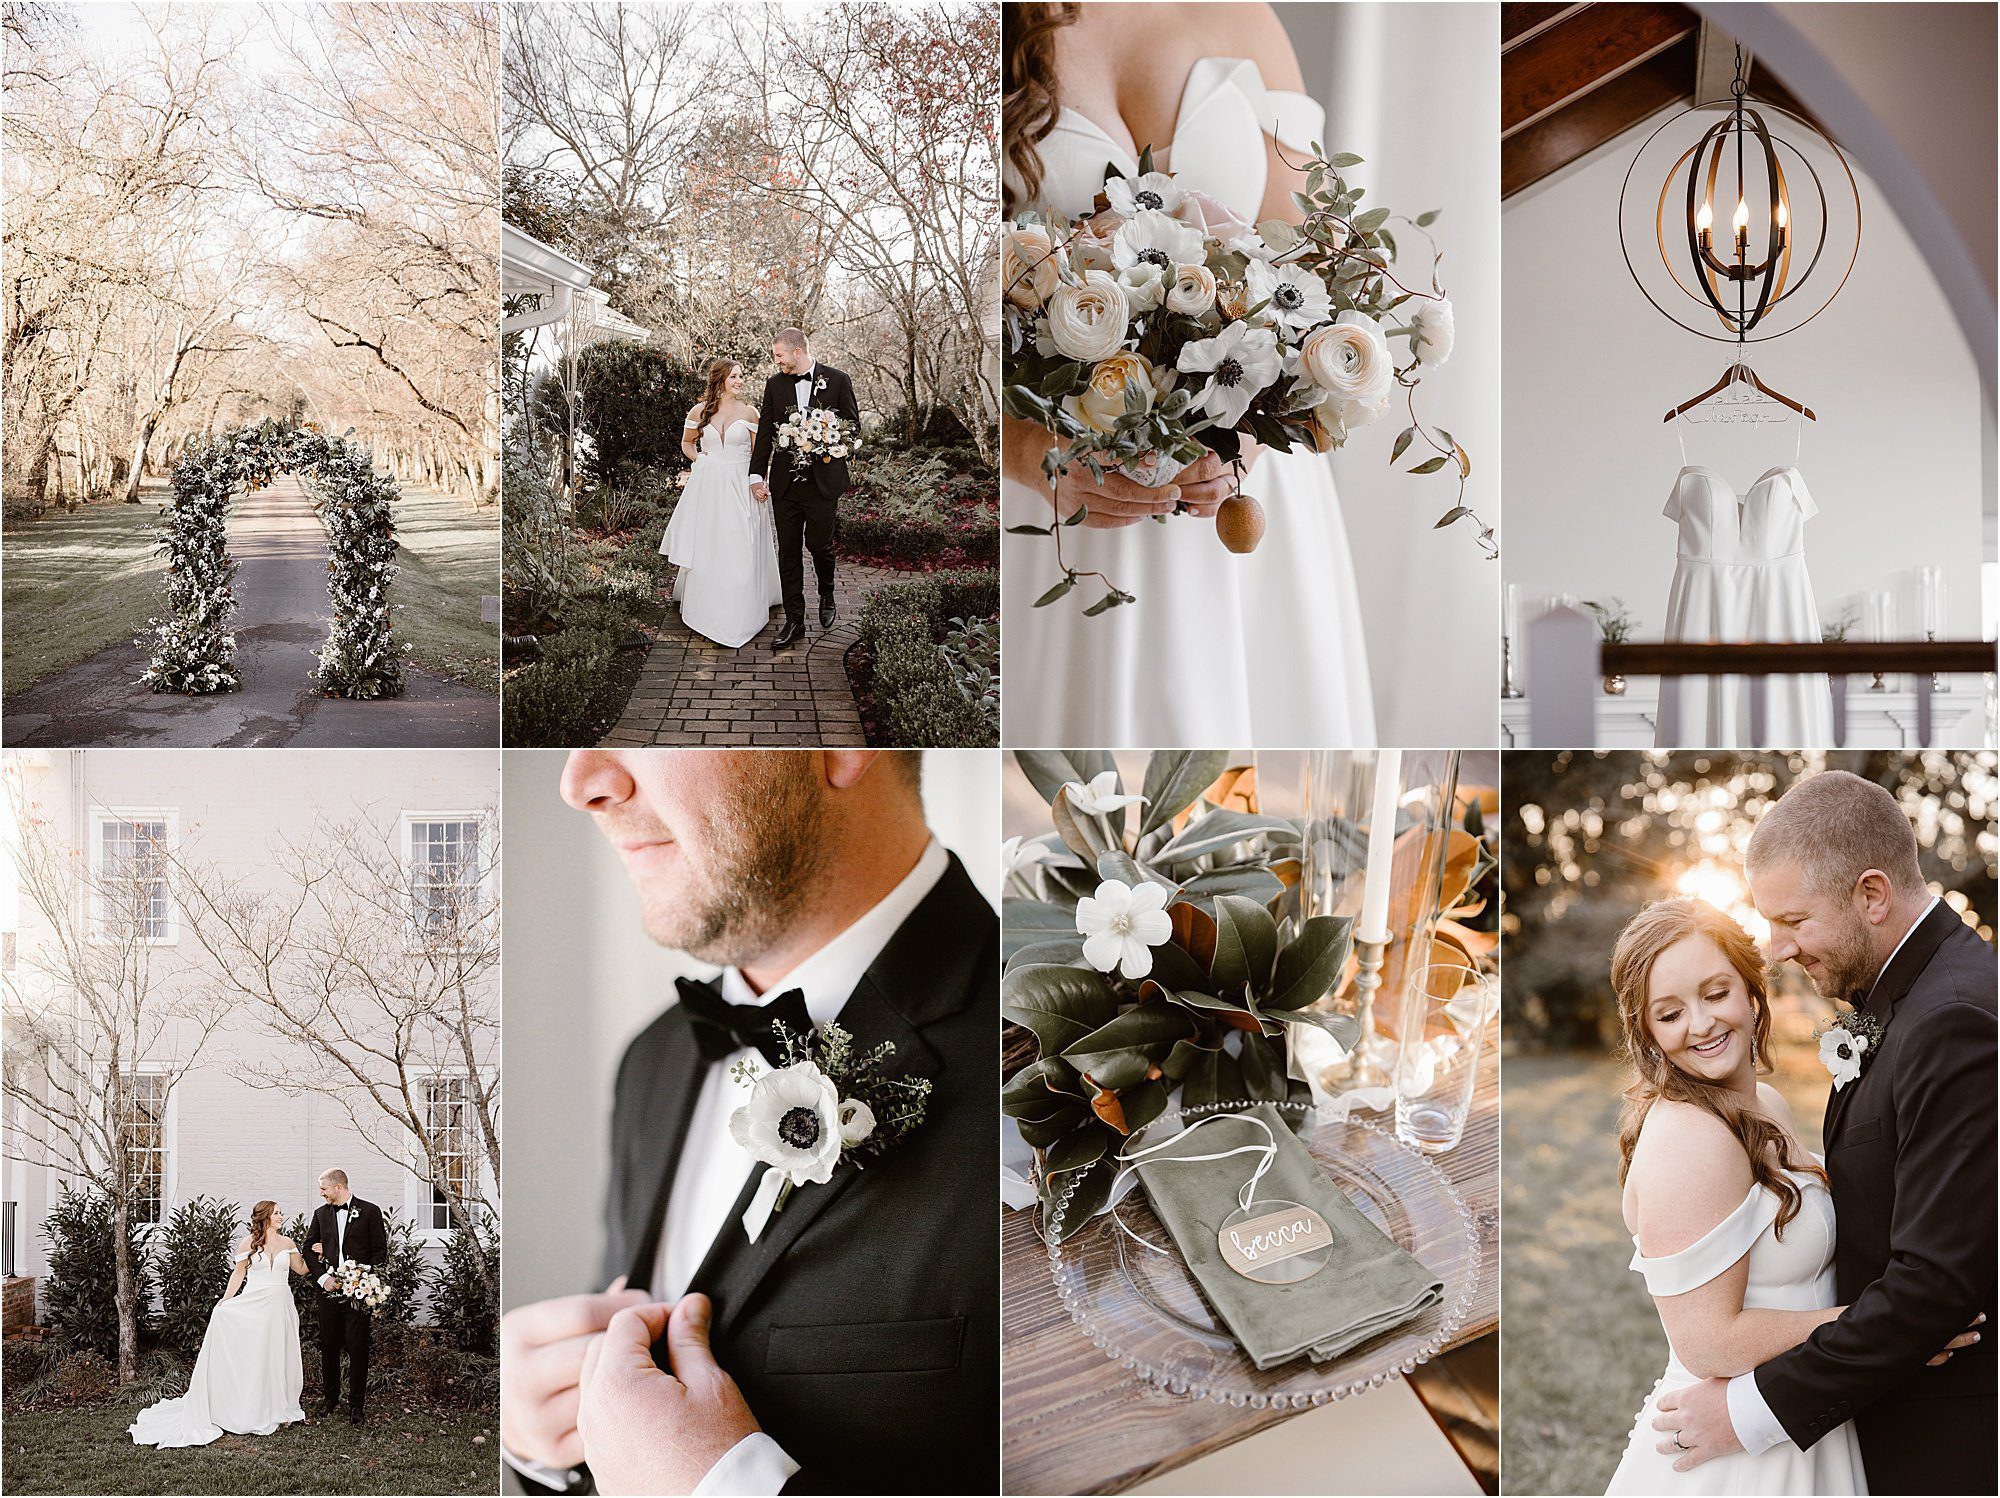 Maple Grove Estate Wedding in Knoxville